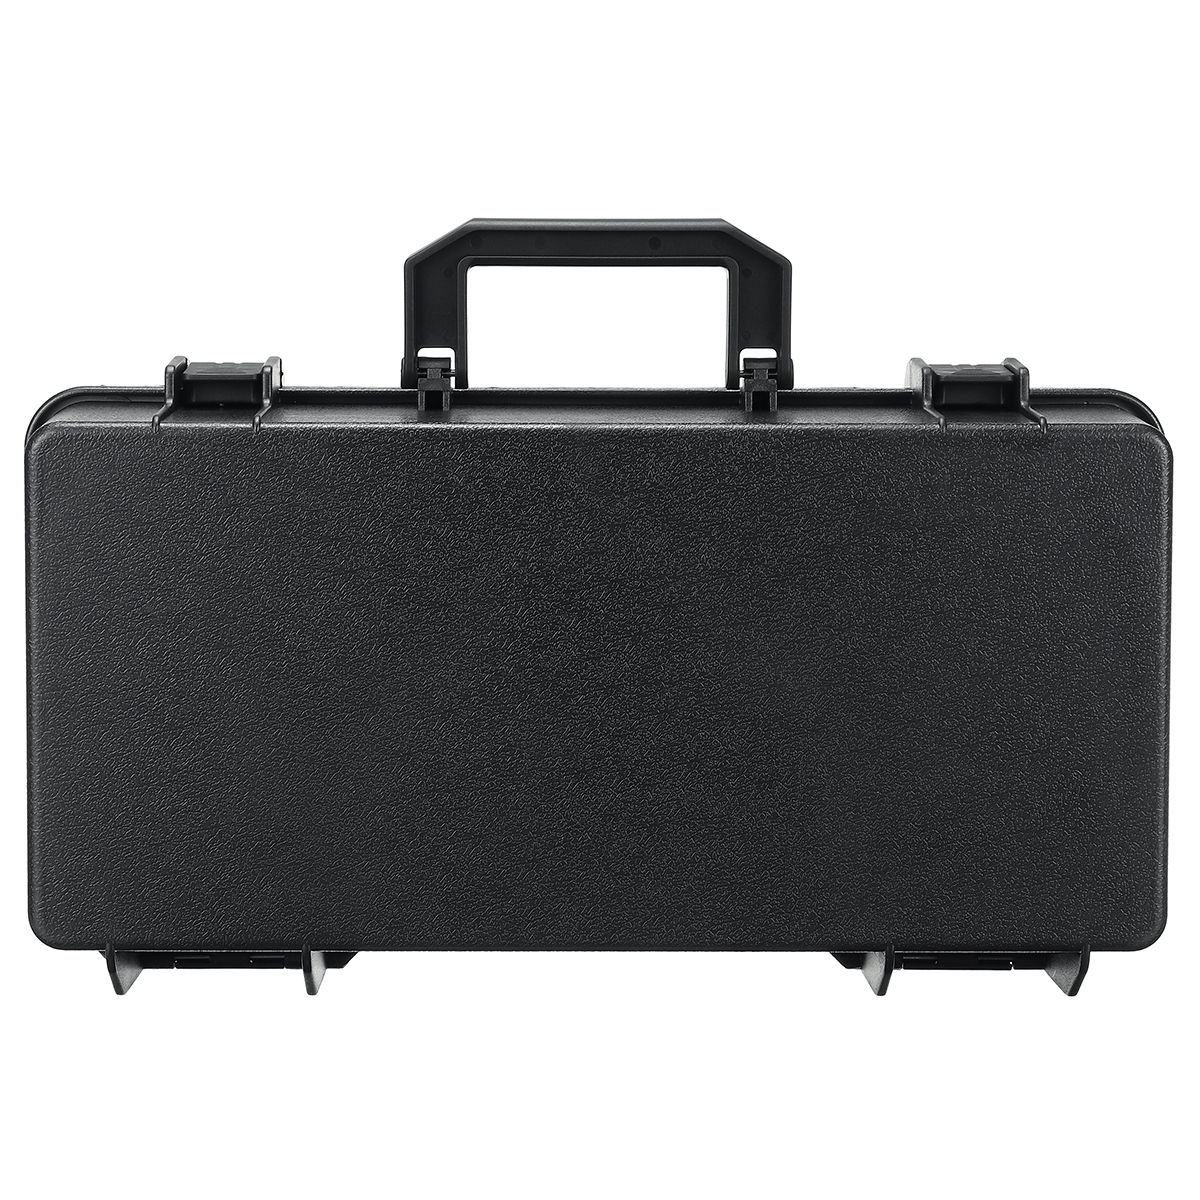 Find Black Safety Protective Box Abs Plastic Tool Box Slr Camera Equipment Box Plastic Tool Box for Sale on Gipsybee.com with cryptocurrencies